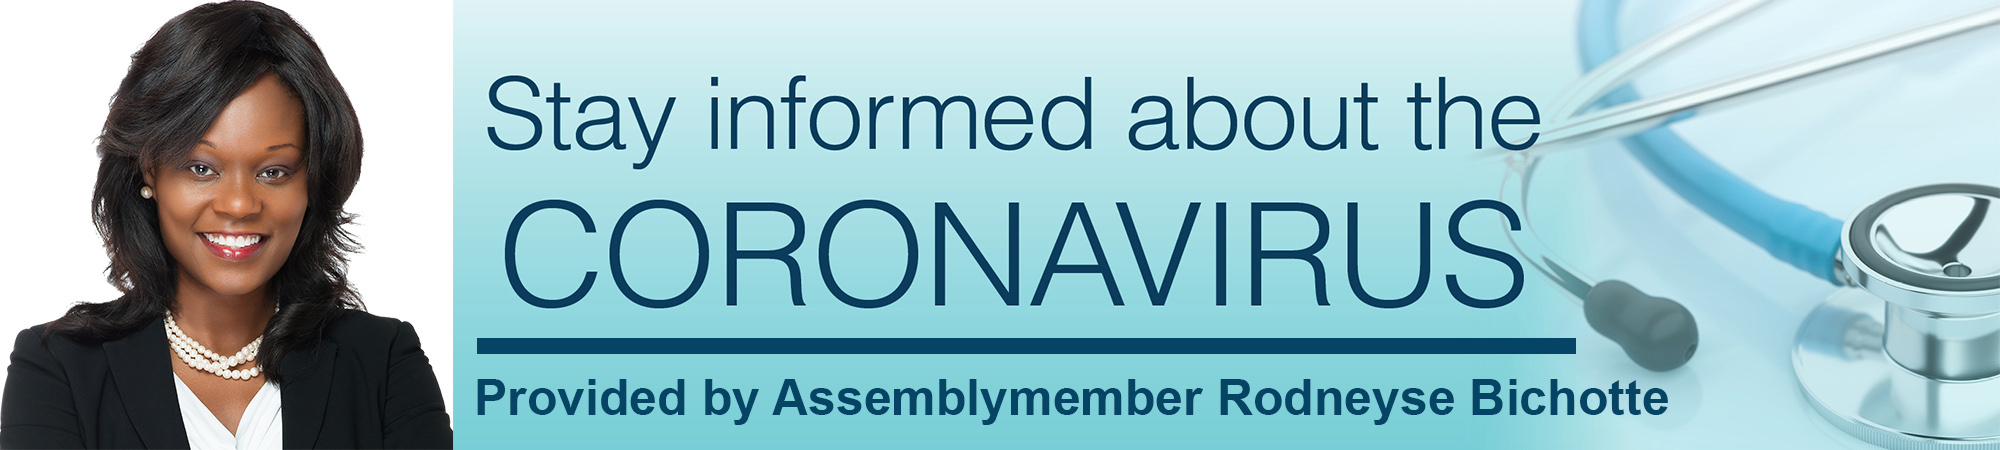 Stay Informed About the Coronavirus - Provided by Assemblymember Rodneyse Bichotte